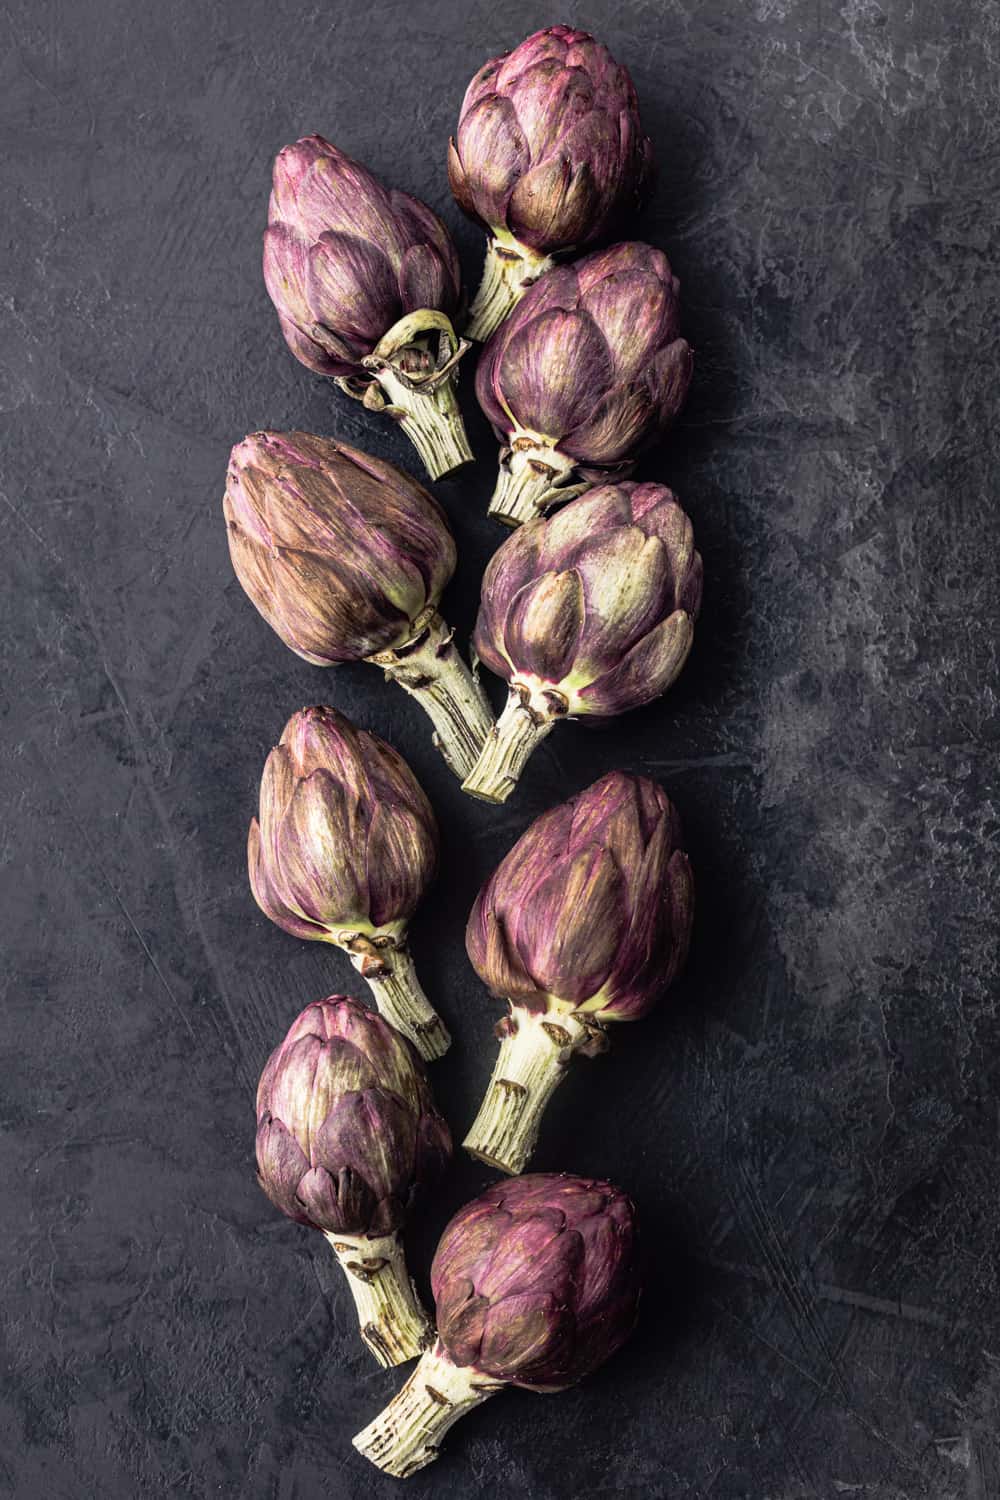 9 whole baby artichokes, raw and on a black background.